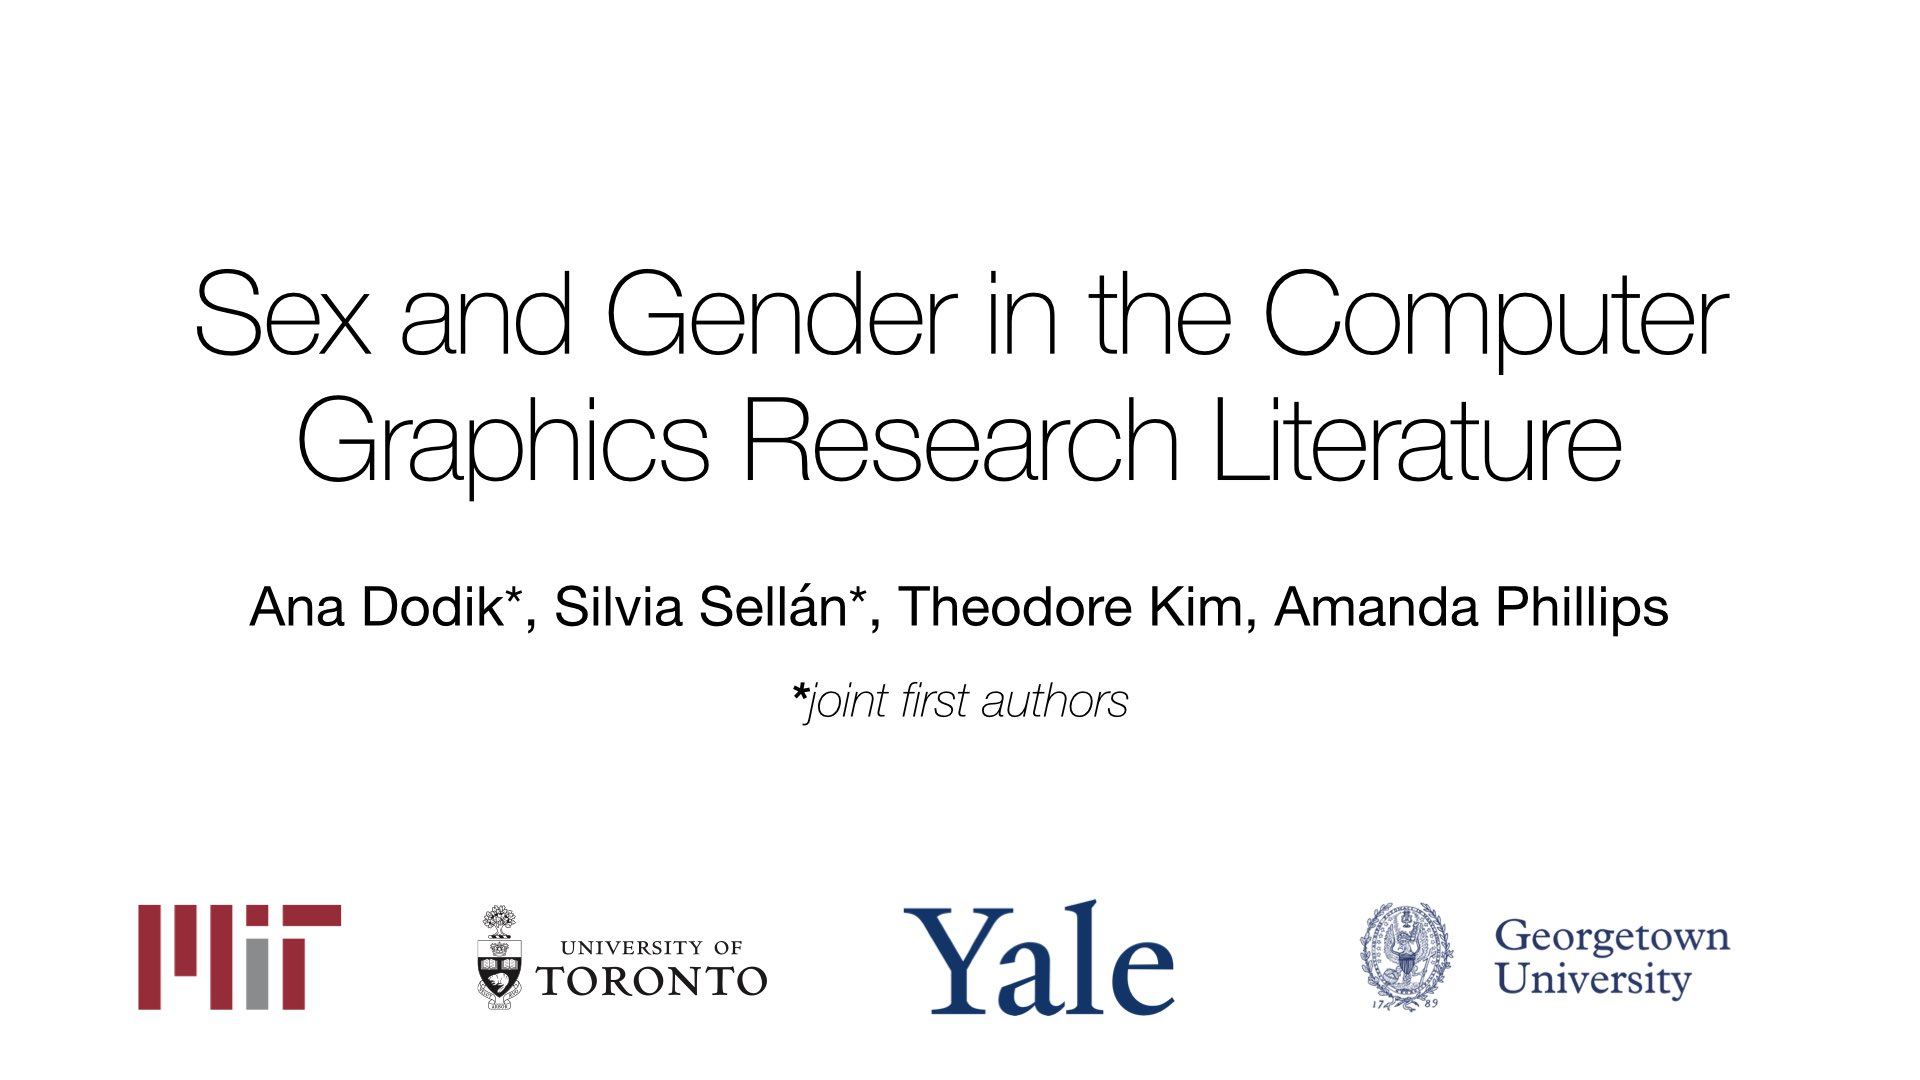 Featured image from Sex and Gender in the Computer Graphics Research Literature.